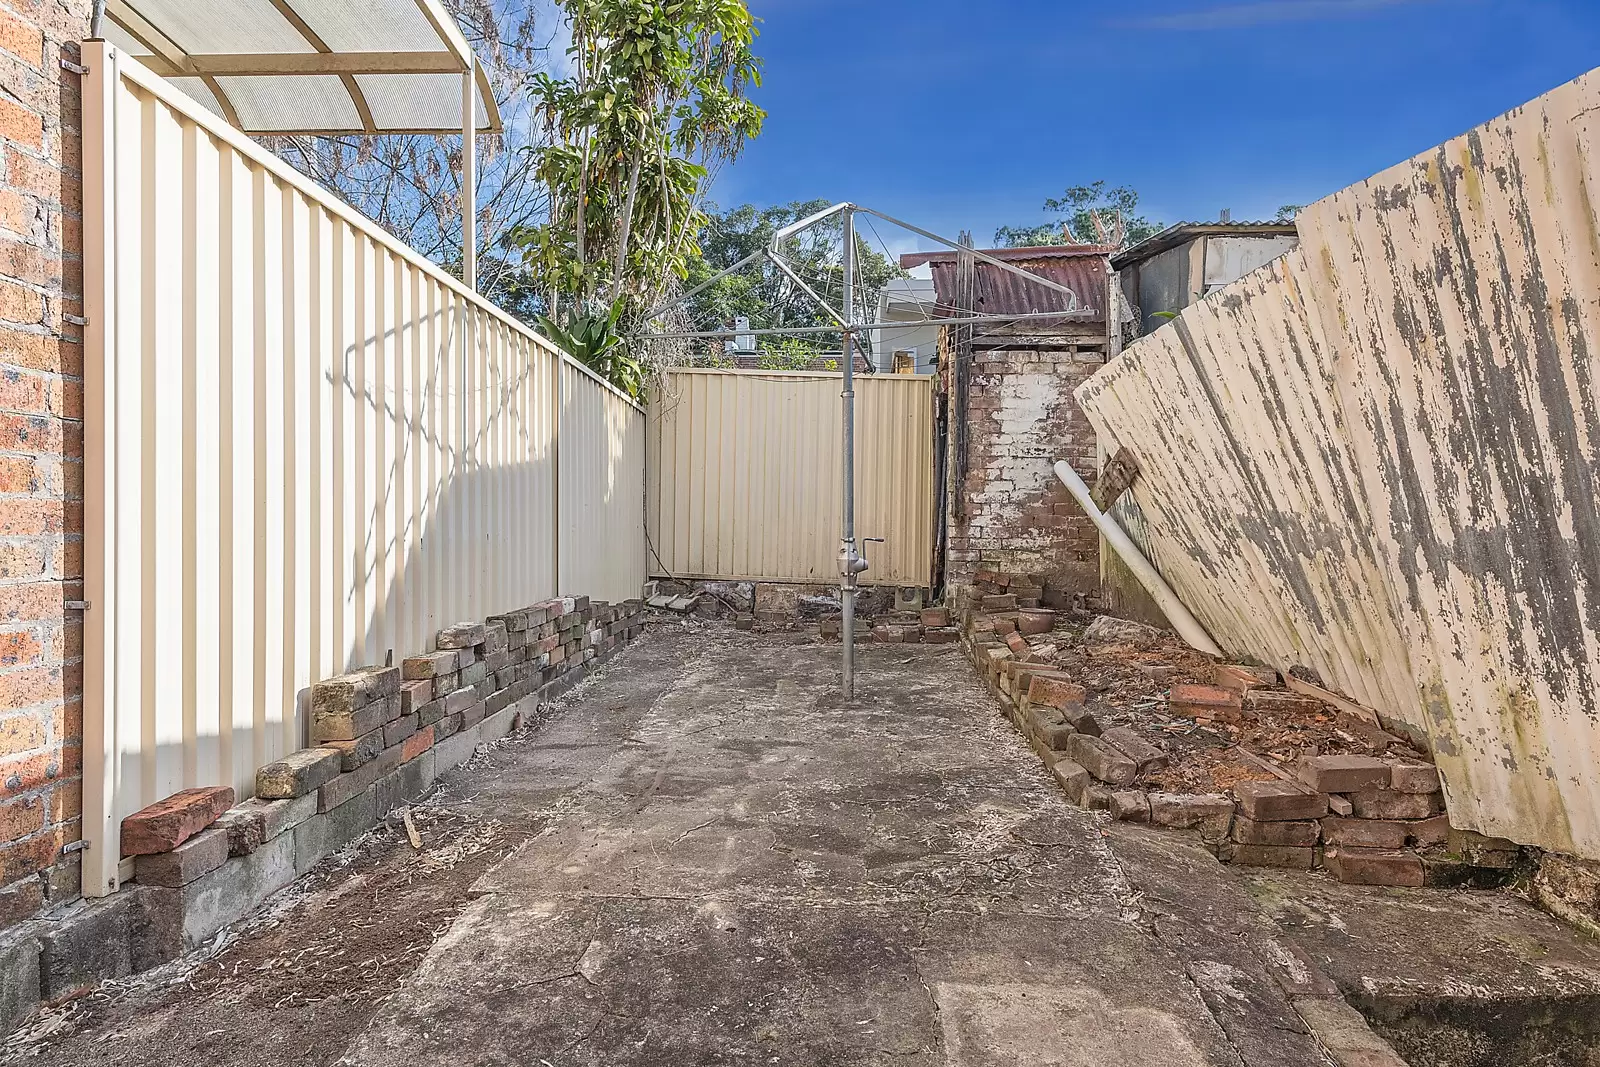 Photo #4: 13 Kirk Street, Ultimo - Sold by Sydney Sotheby's International Realty